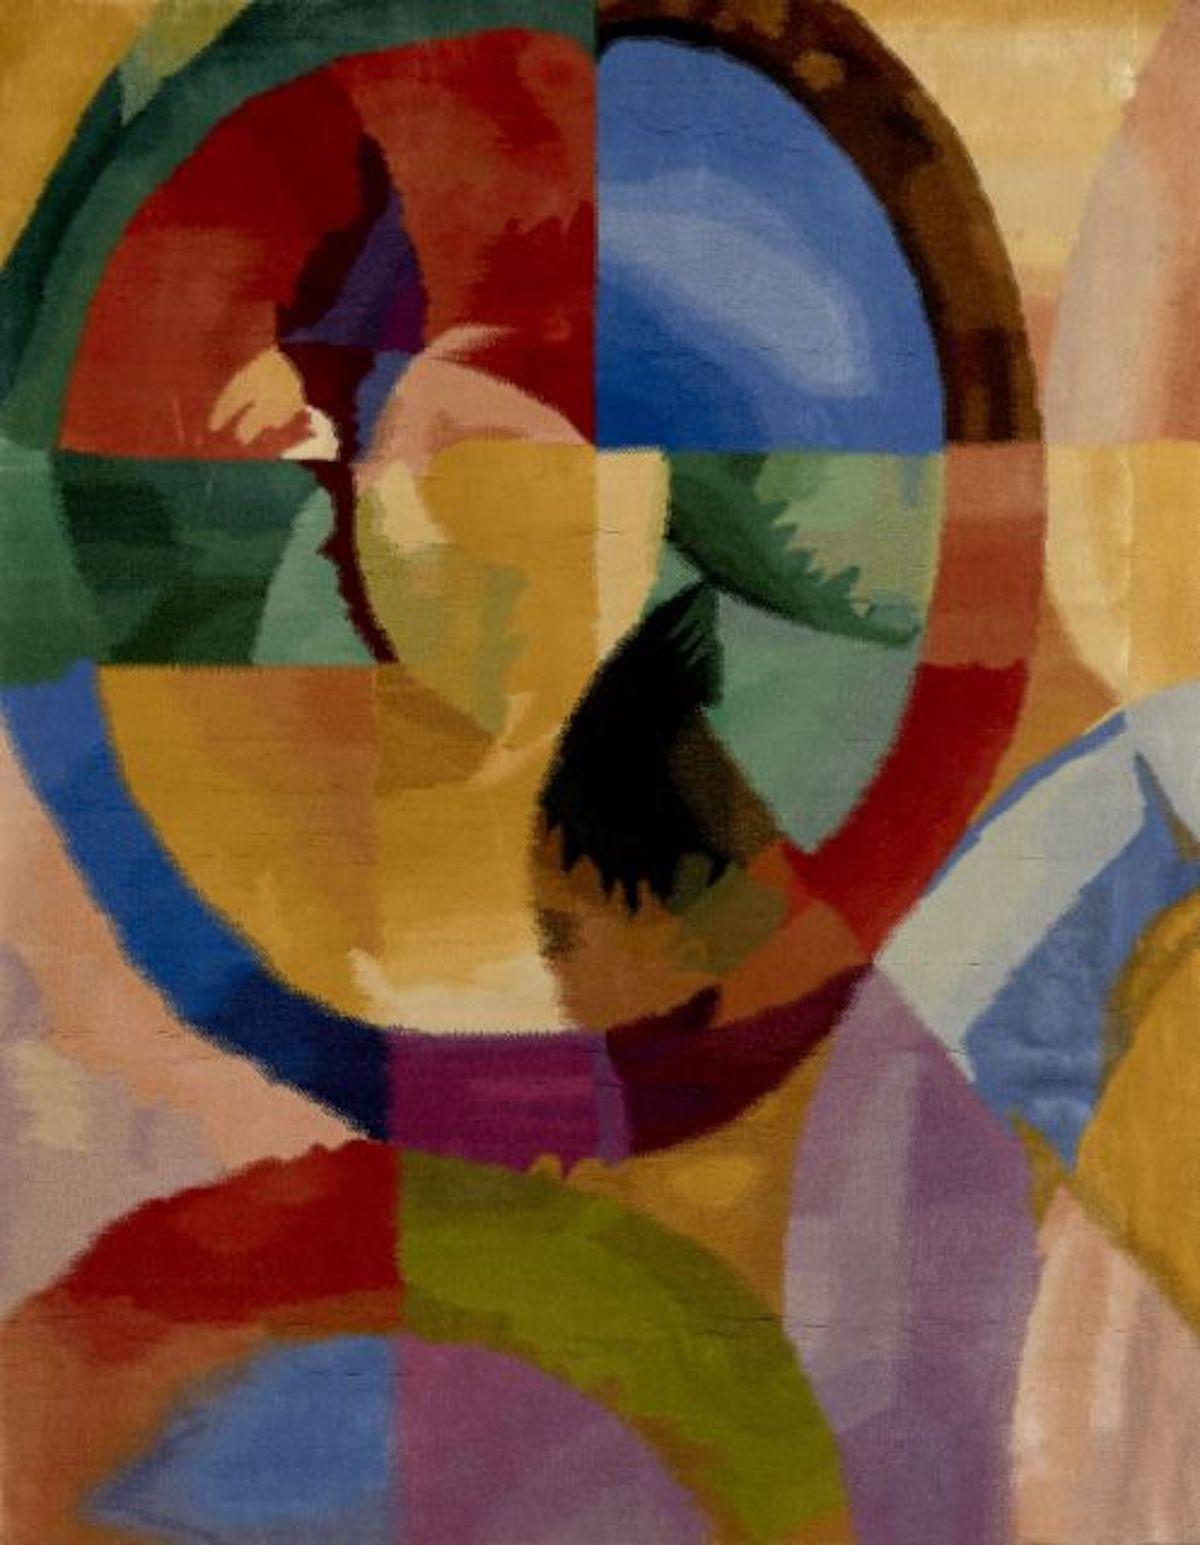 Soleil n.1. by Robert Delaunay, 1980 ca, Silk wool Tapestry woven on Canvas 4